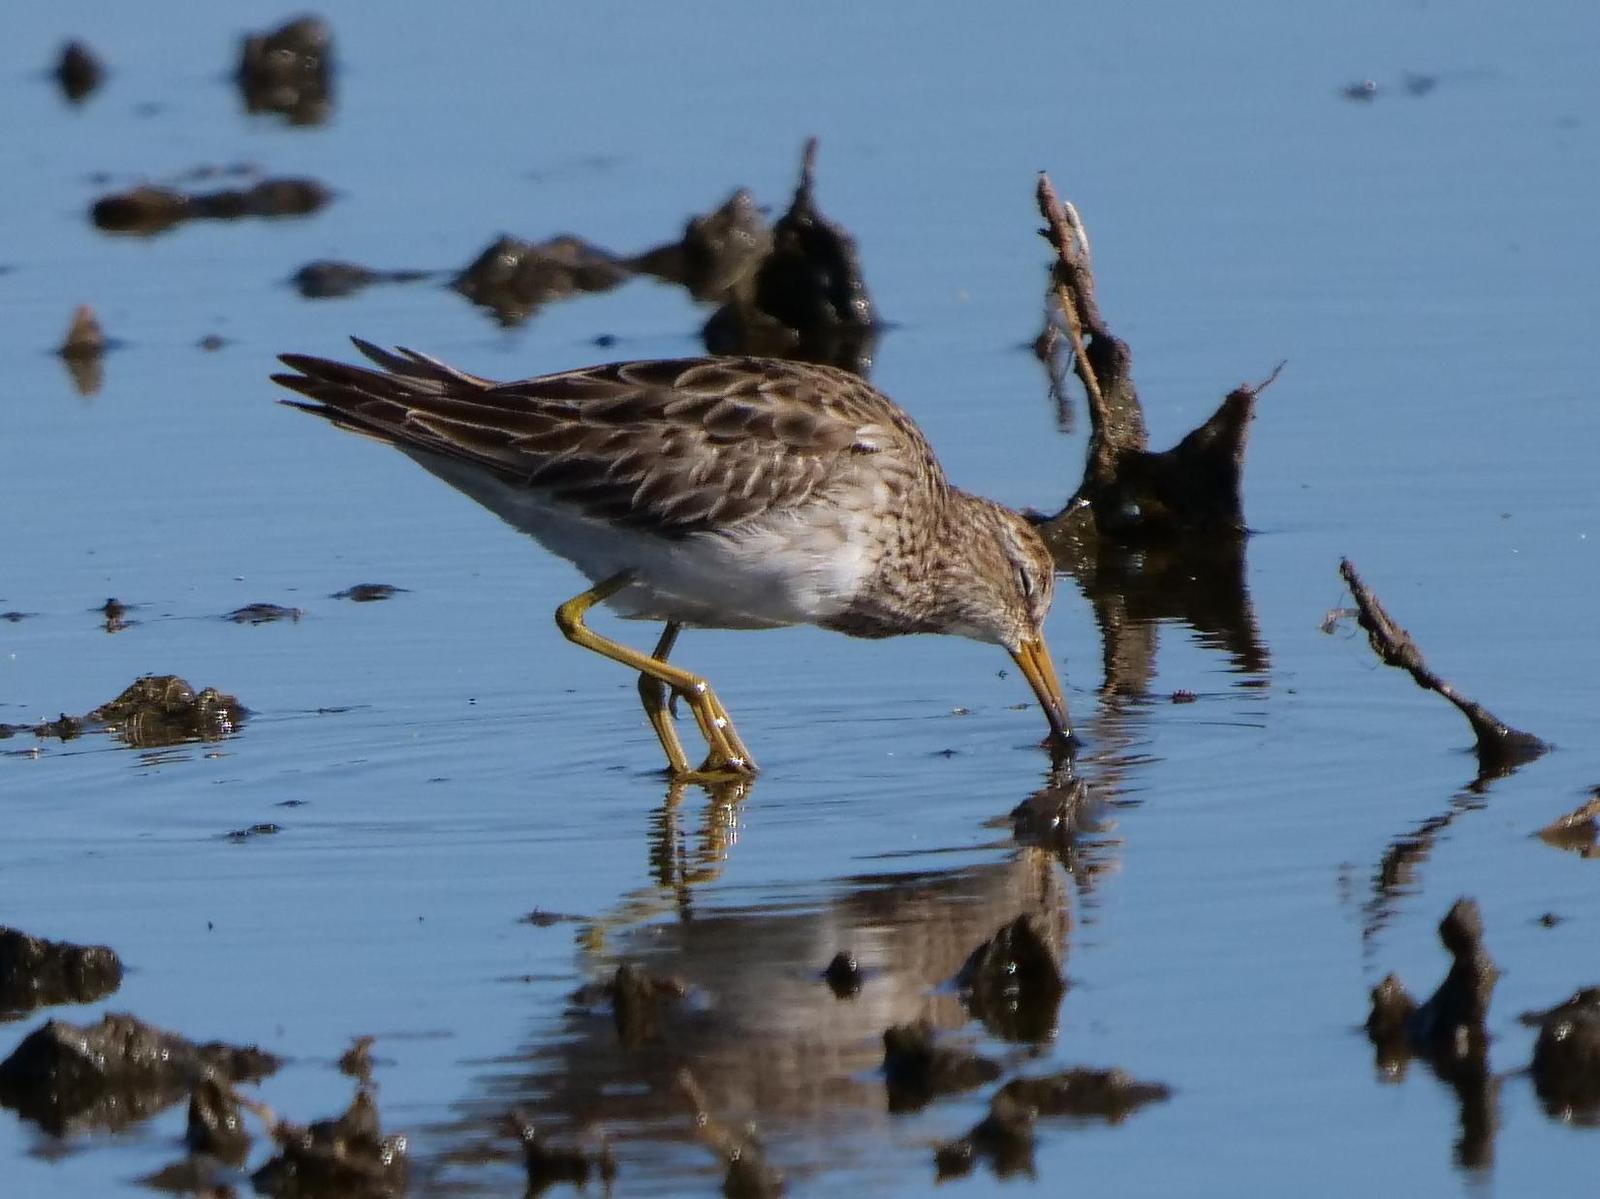 Pectoral Sandpiper Photo by Peter Lowe